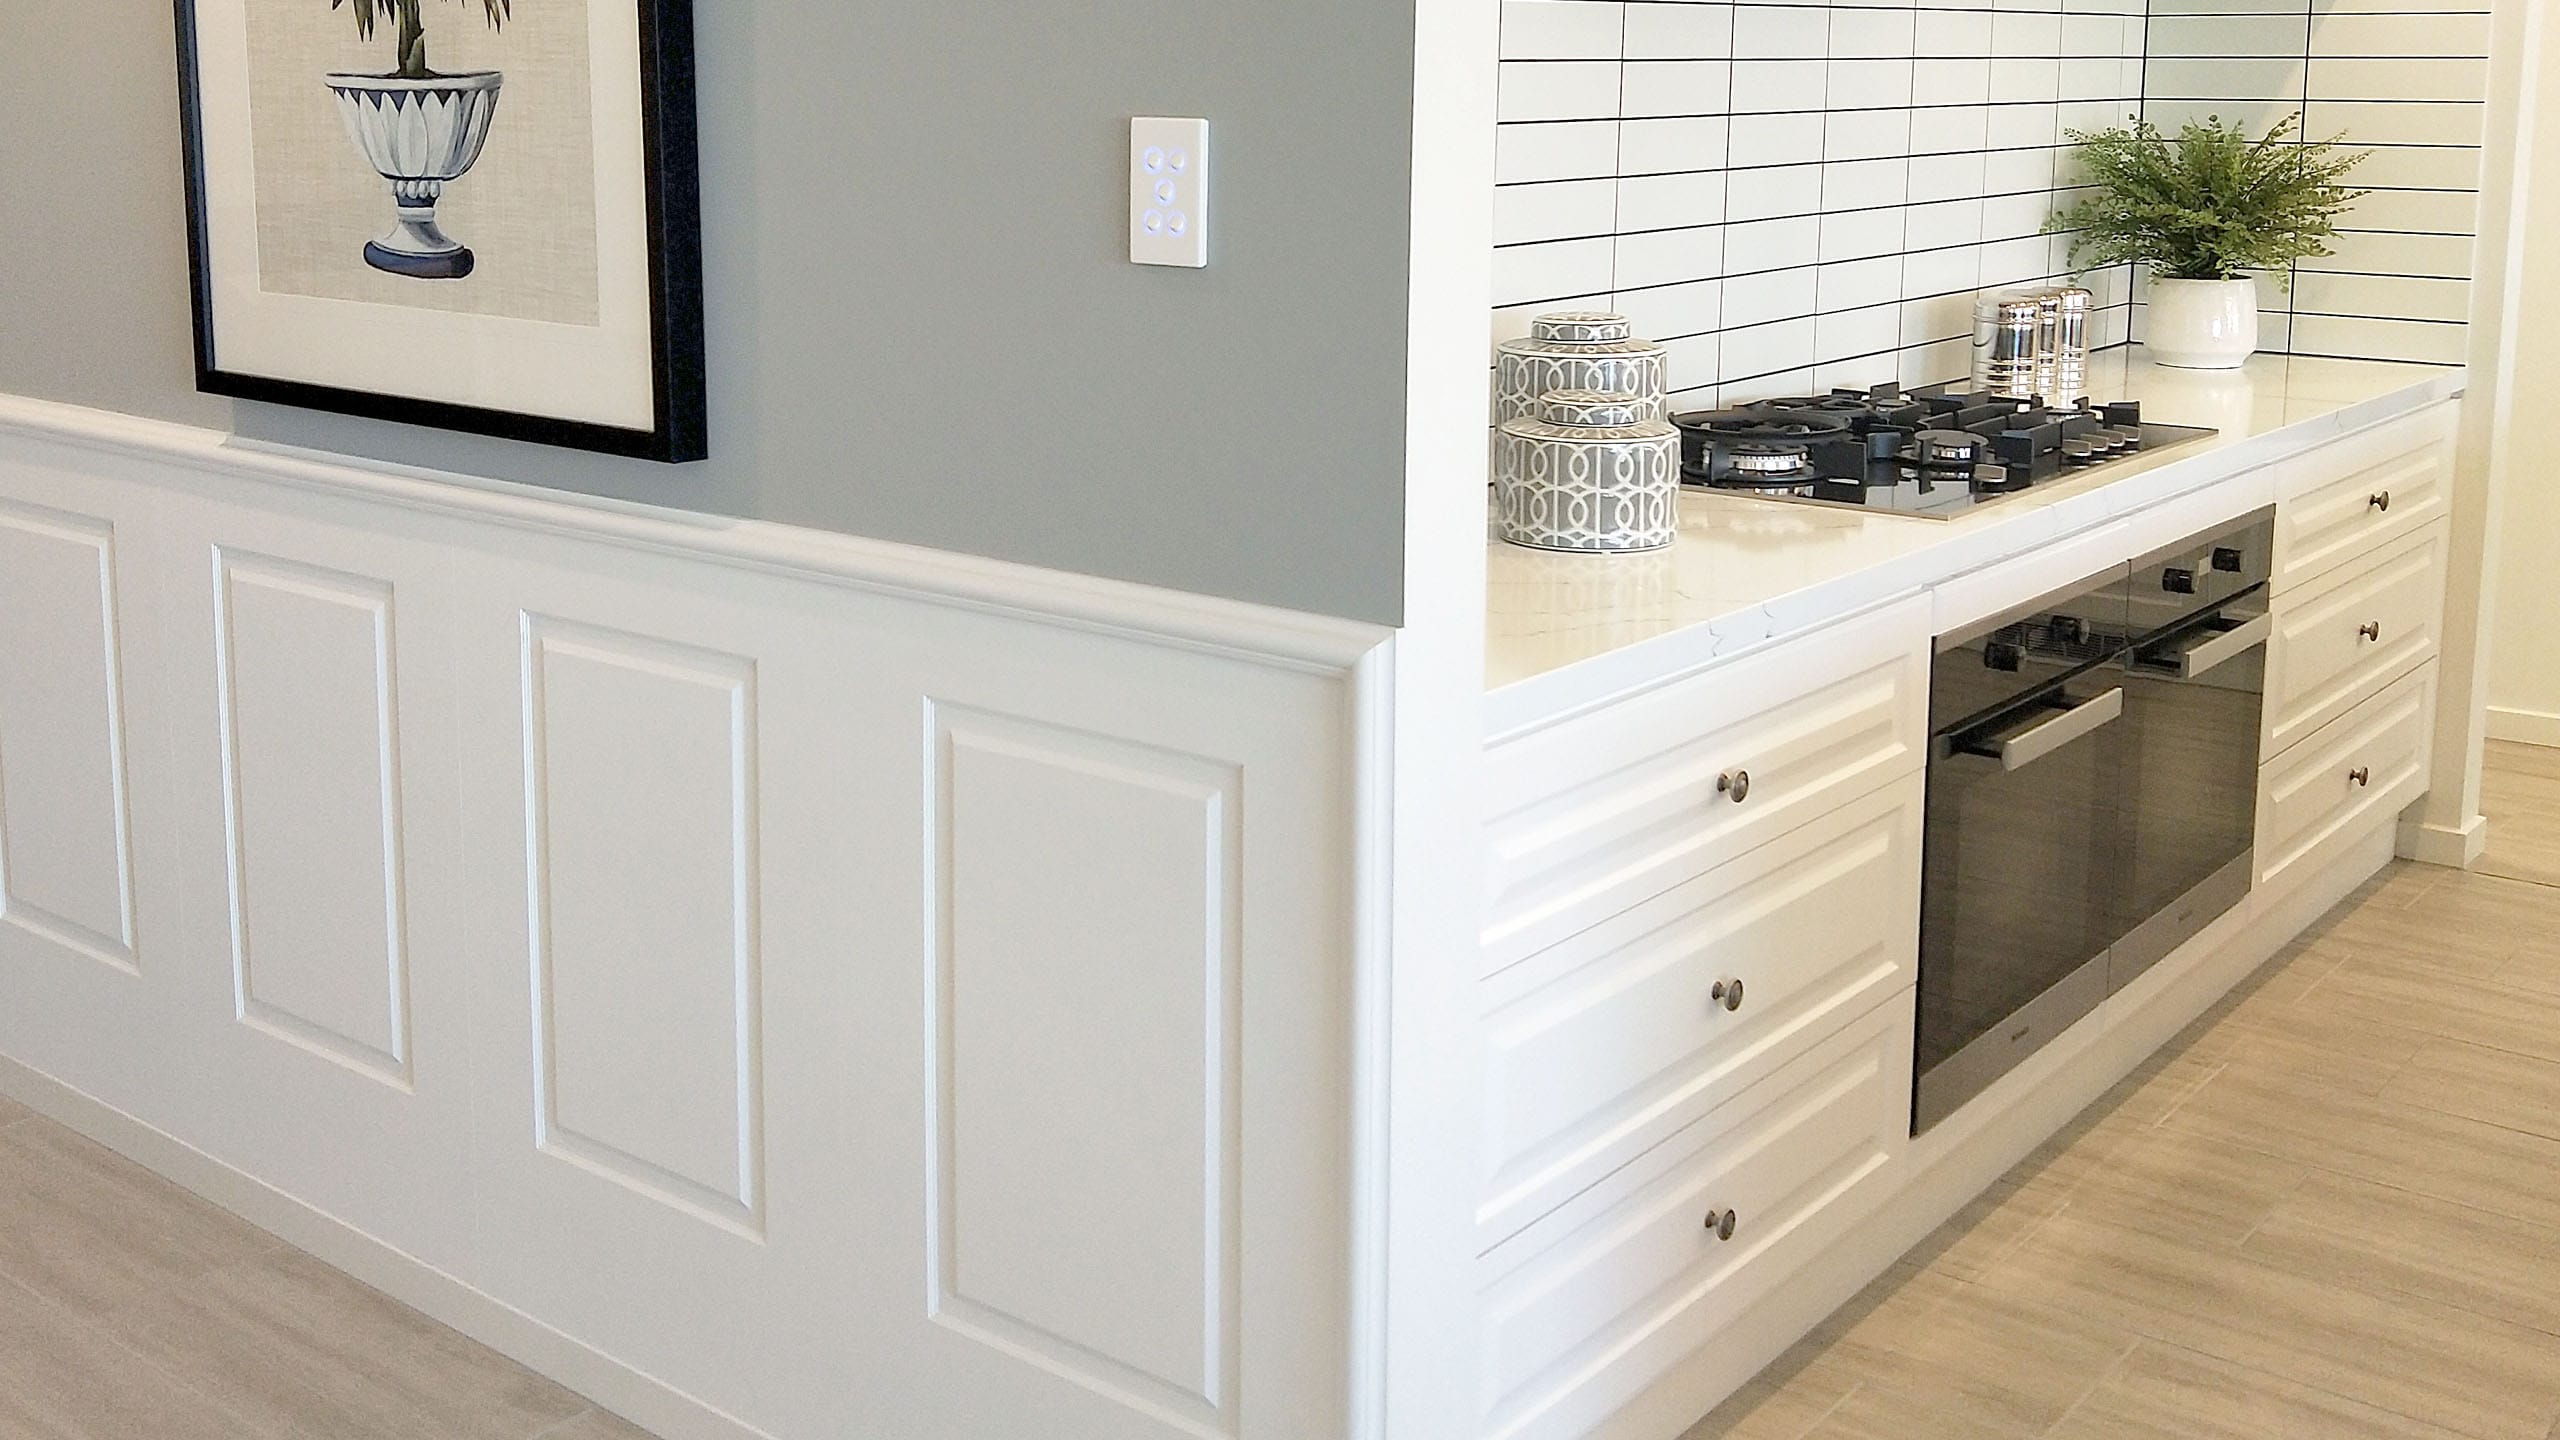 Colonial Wall Linings - Kitchen with Wainscoting Wall Panels featuring Timber Moldings - MDF Moldings - Dado Rail, Belt Rail, Skirt, Skirts, Skirting, Architrave, Architraves